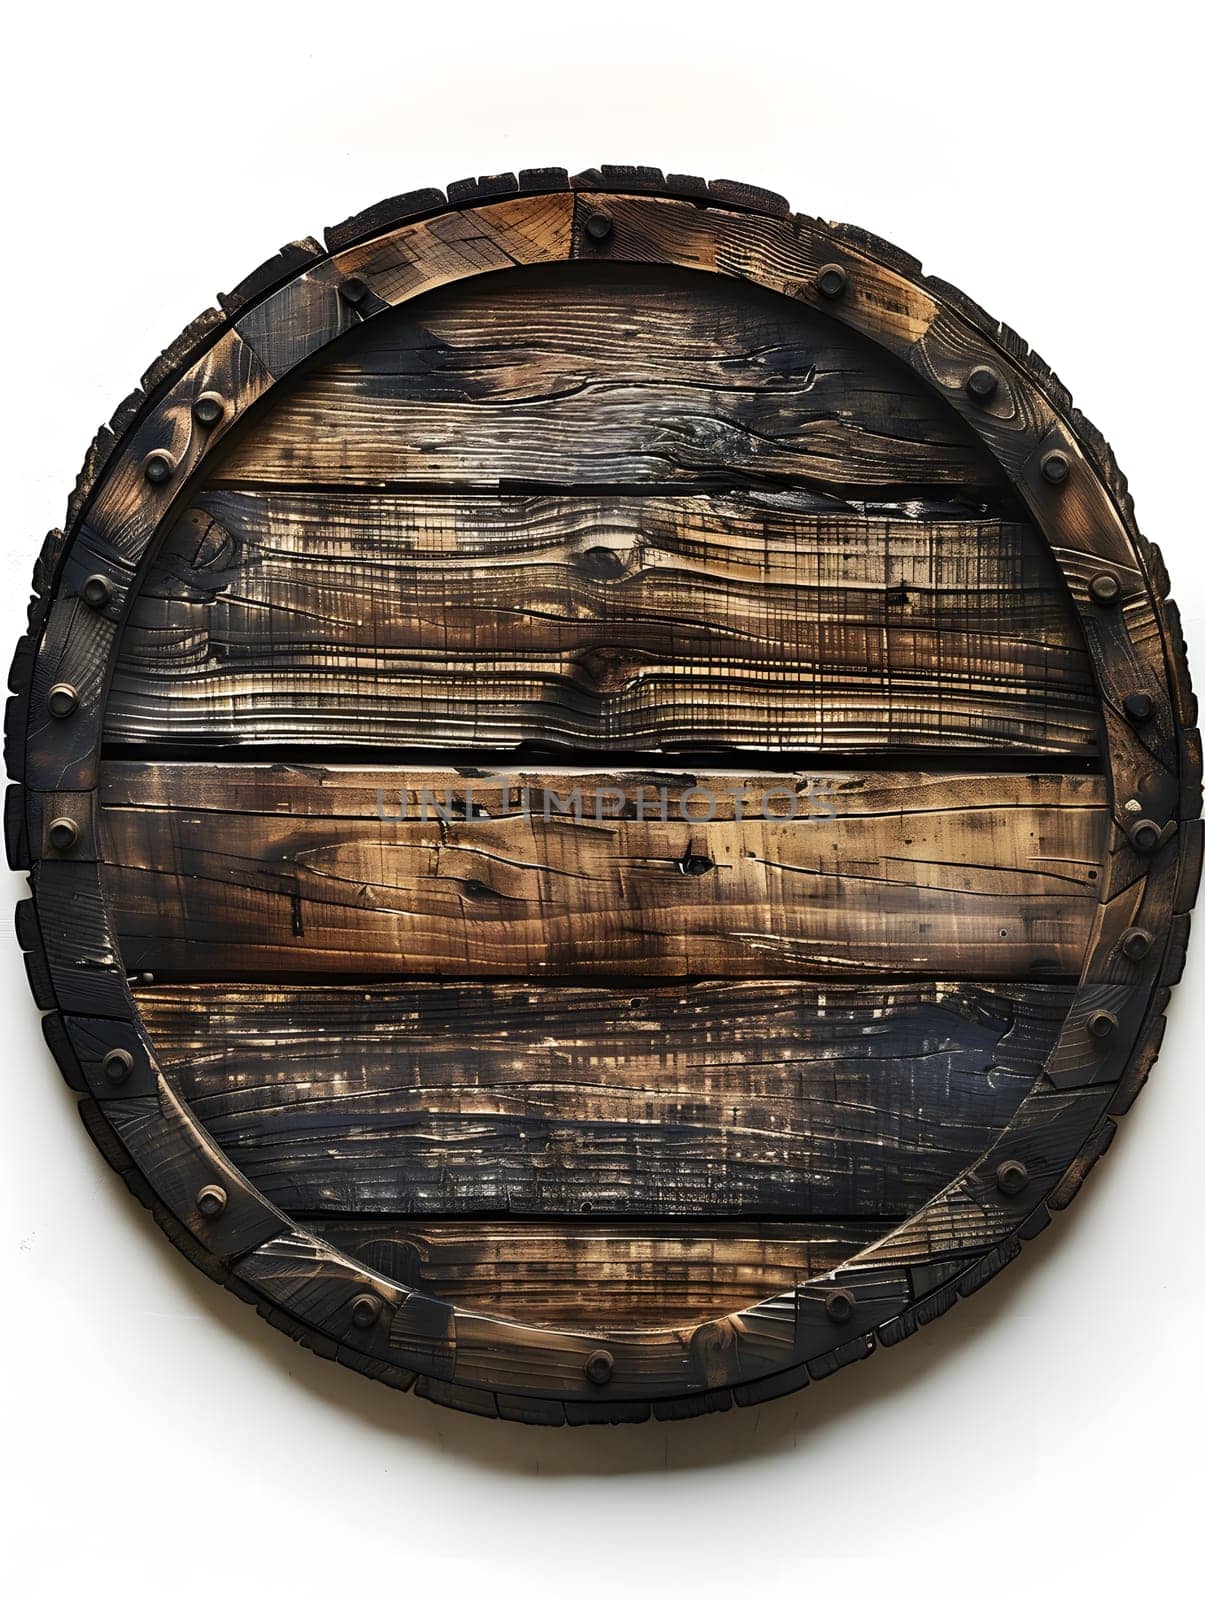 a round wooden shield with a metal rim on a white background by Nadtochiy